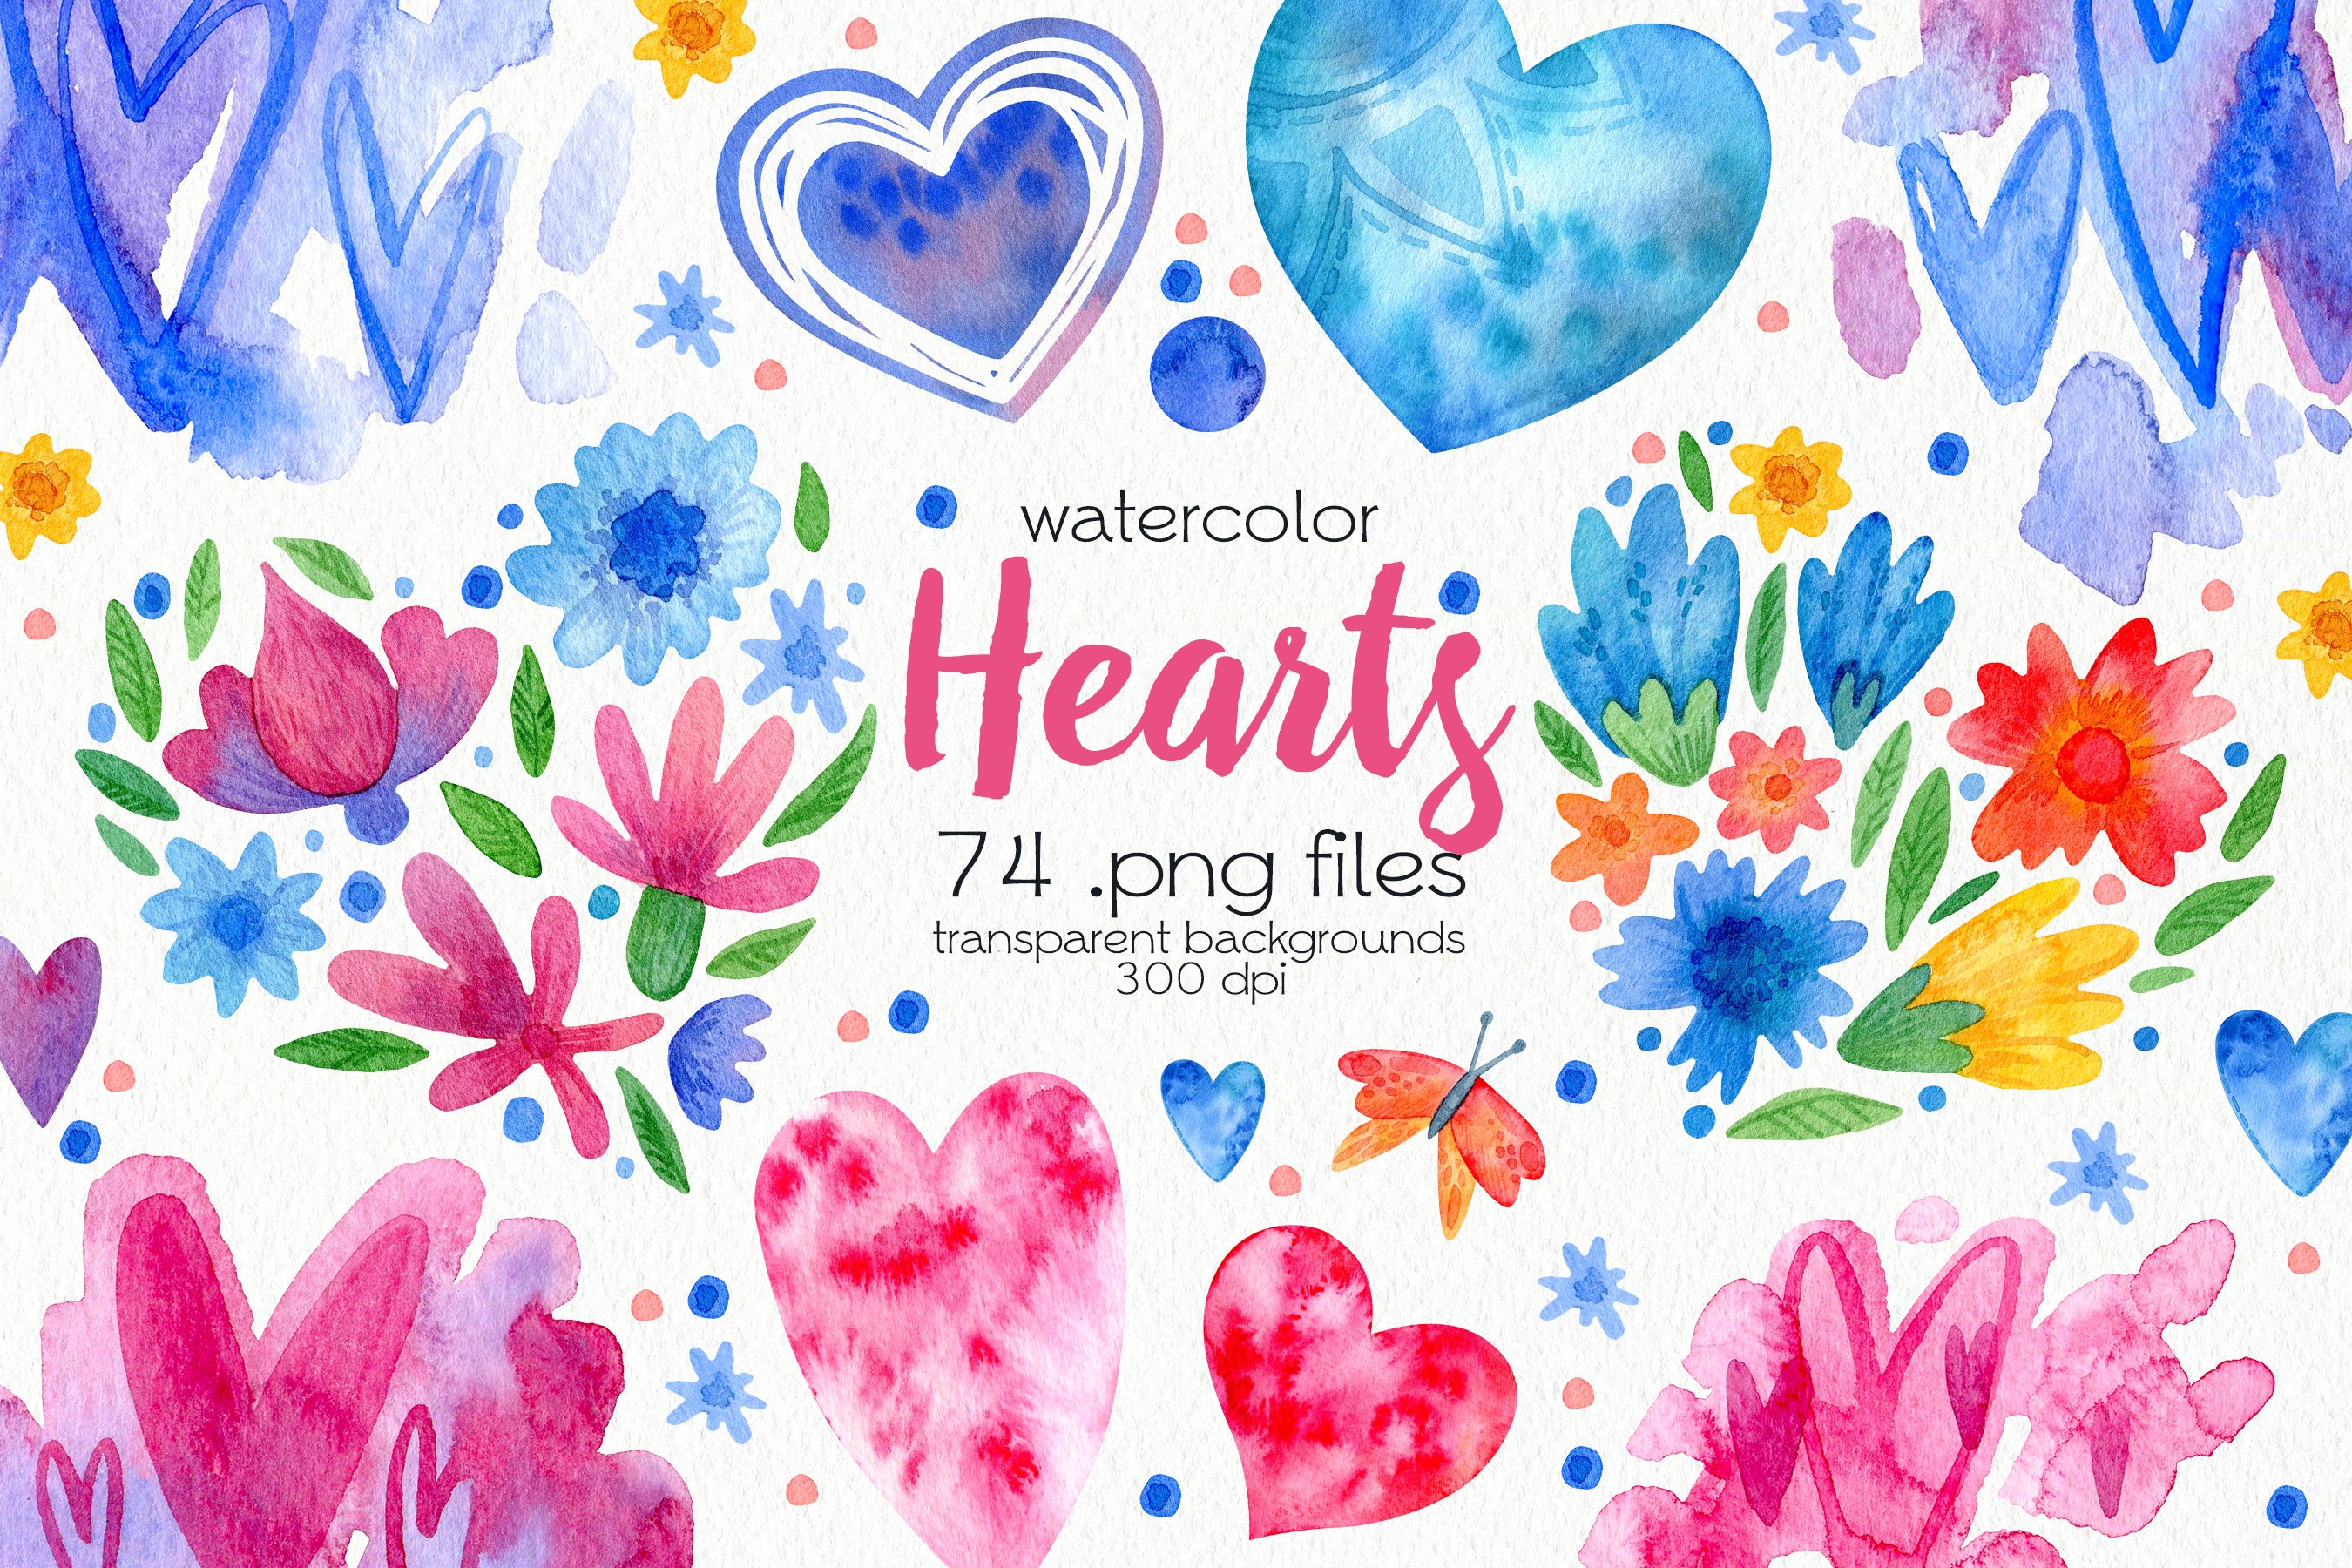 Watercolor colorful heart illustration.